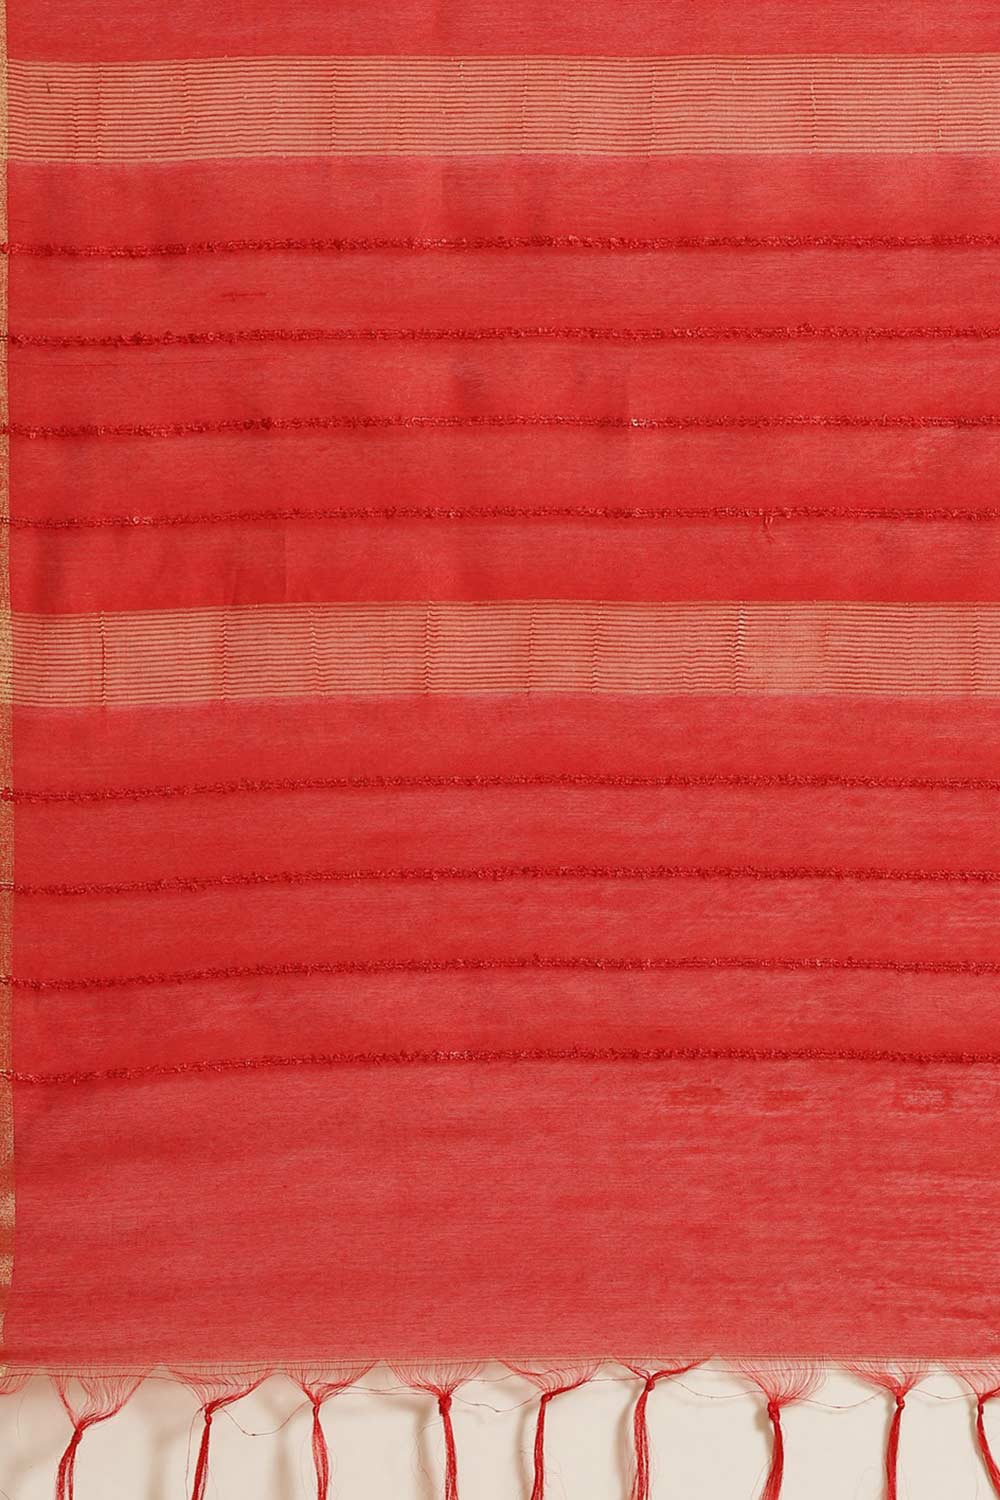 Buy Sheba Red Zari Woven Blended Silk One Minute Saree Online - Back